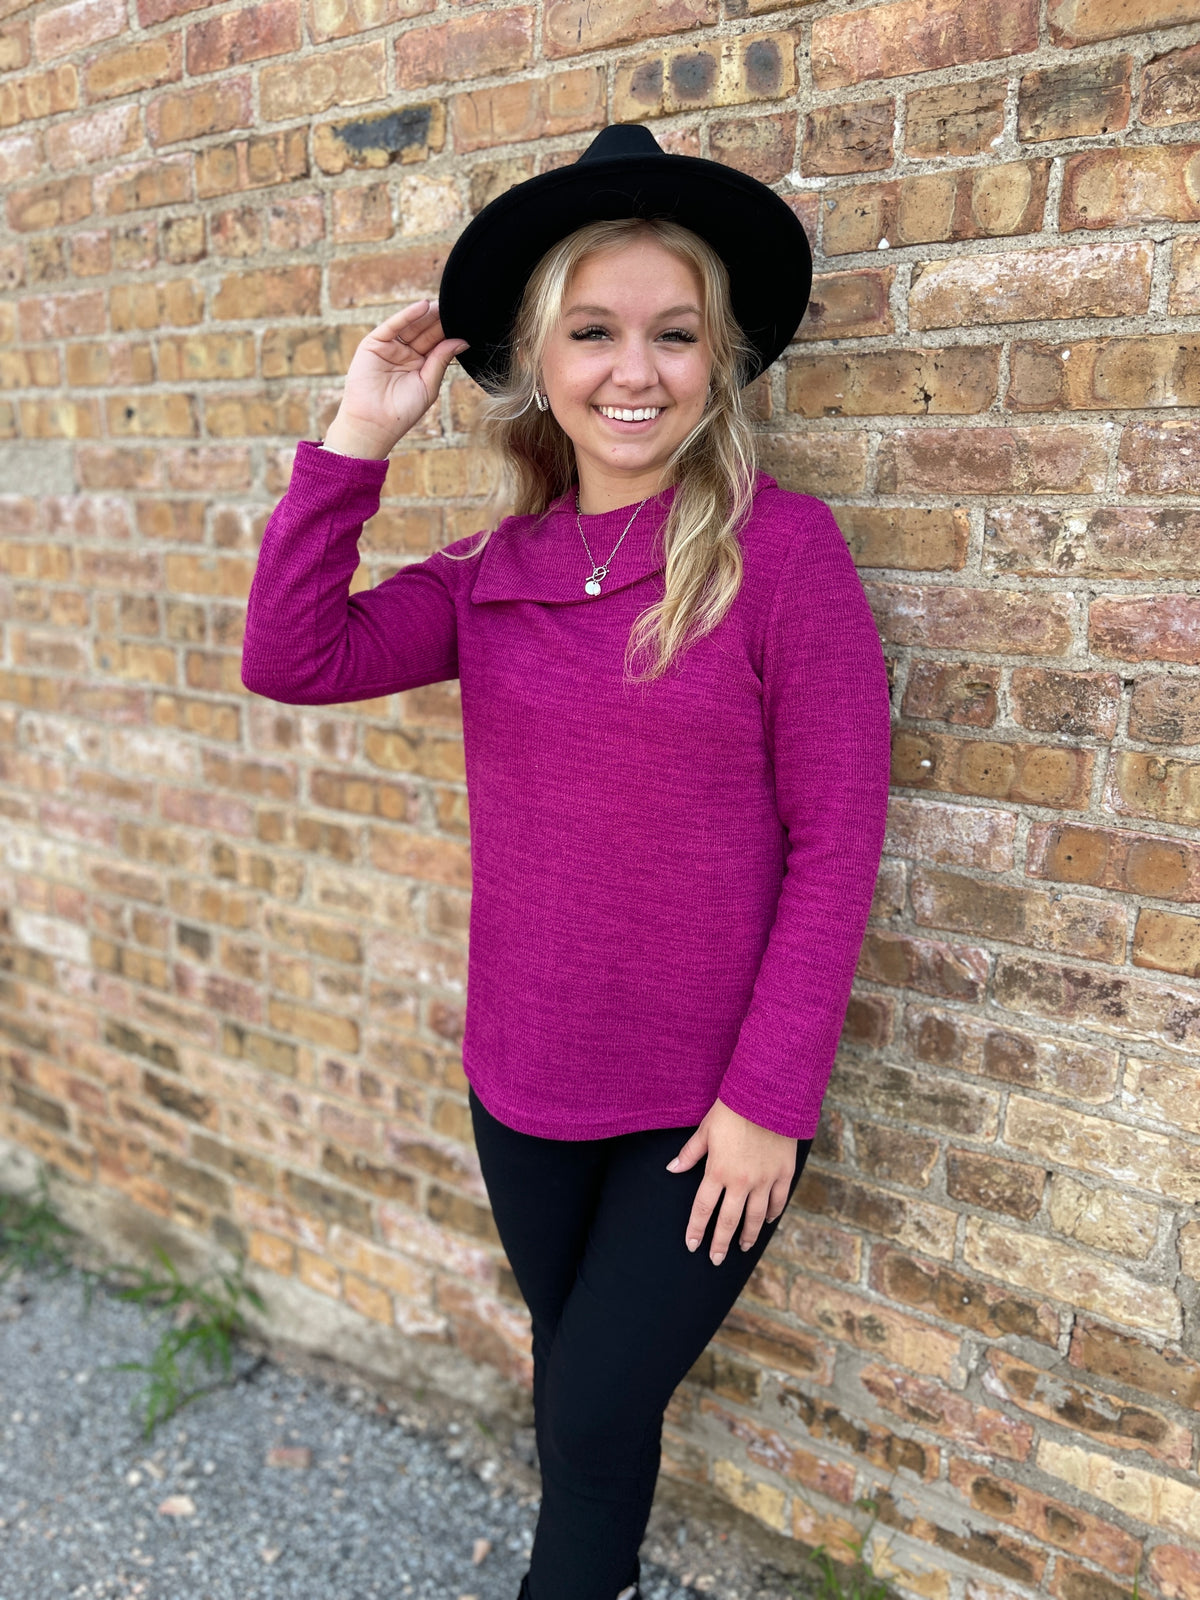 PLUM HEATHERED COWL NECK KNIT TOP